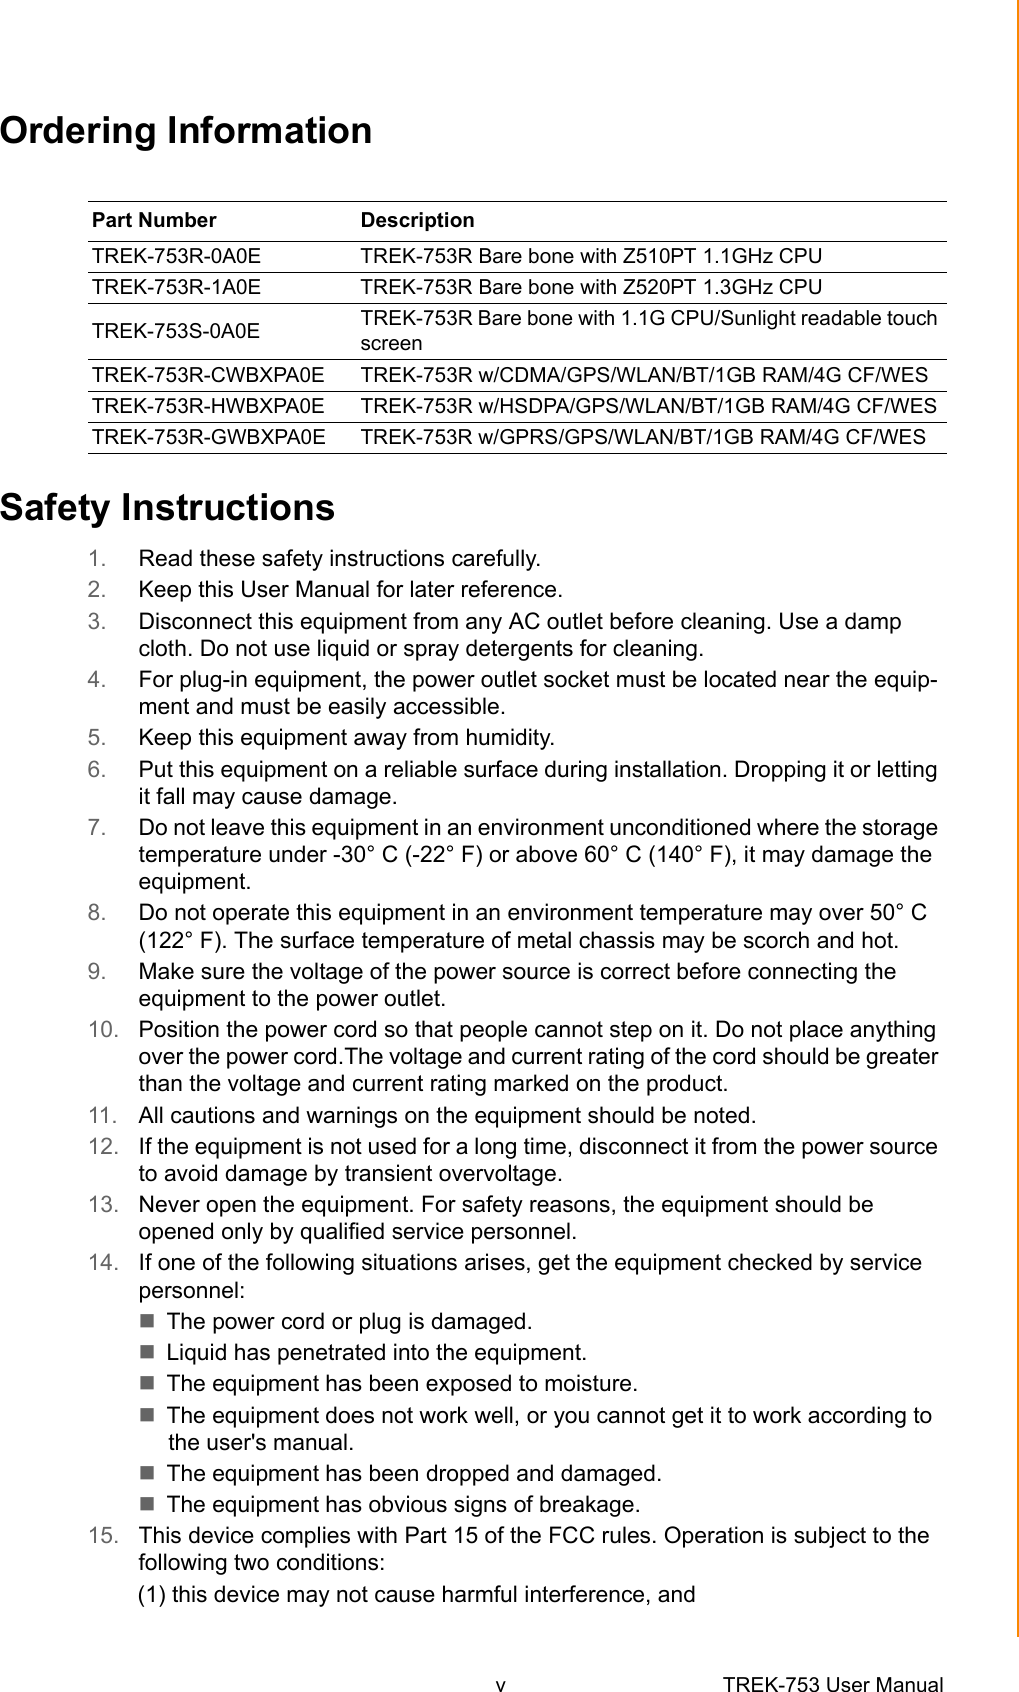 v TREK-753 User Manual Ordering InformationSafety Instructions1. Read these safety instructions carefully.2. Keep this User Manual for later reference.3. Disconnect this equipment from any AC outlet before cleaning. Use a damp cloth. Do not use liquid or spray detergents for cleaning.4. For plug-in equipment, the power outlet socket must be located near the equip-ment and must be easily accessible.5. Keep this equipment away from humidity.6. Put this equipment on a reliable surface during installation. Dropping it or letting it fall may cause damage.7. Do not leave this equipment in an environment unconditioned where the storage temperature under -30° C (-22° F) or above 60° C (140° F), it may damage the equipment. 8. Do not operate this equipment in an environment temperature may over 50° C (122° F). The surface temperature of metal chassis may be scorch and hot.9. Make sure the voltage of the power source is correct before connecting the equipment to the power outlet.10. Position the power cord so that people cannot step on it. Do not place anything over the power cord.The voltage and current rating of the cord should be greater than the voltage and current rating marked on the product.11. All cautions and warnings on the equipment should be noted.12. If the equipment is not used for a long time, disconnect it from the power source to avoid damage by transient overvoltage.13. Never open the equipment. For safety reasons, the equipment should be opened only by qualified service personnel.14. If one of the following situations arises, get the equipment checked by service personnel:The power cord or plug is damaged.Liquid has penetrated into the equipment.The equipment has been exposed to moisture.The equipment does not work well, or you cannot get it to work according to the user&apos;s manual.The equipment has been dropped and damaged.The equipment has obvious signs of breakage.15. This device complies with Part 15 of the FCC rules. Operation is subject to the following two conditions: (1) this device may not cause harmful interference, and Part Number  DescriptionTREK-753R-0A0E  TREK-753R Bare bone with Z510PT 1.1GHz CPUTREK-753R-1A0E  TREK-753R Bare bone with Z520PT 1.3GHz CPUTREK-753S-0A0E  TREK-753R Bare bone with 1.1G CPU/Sunlight readable touch screenTREK-753R-CWBXPA0E TREK-753R w/CDMA/GPS/WLAN/BT/1GB RAM/4G CF/WESTREK-753R-HWBXPA0E TREK-753R w/HSDPA/GPS/WLAN/BT/1GB RAM/4G CF/WESTREK-753R-GWBXPA0E TREK-753R w/GPRS/GPS/WLAN/BT/1GB RAM/4G CF/WES